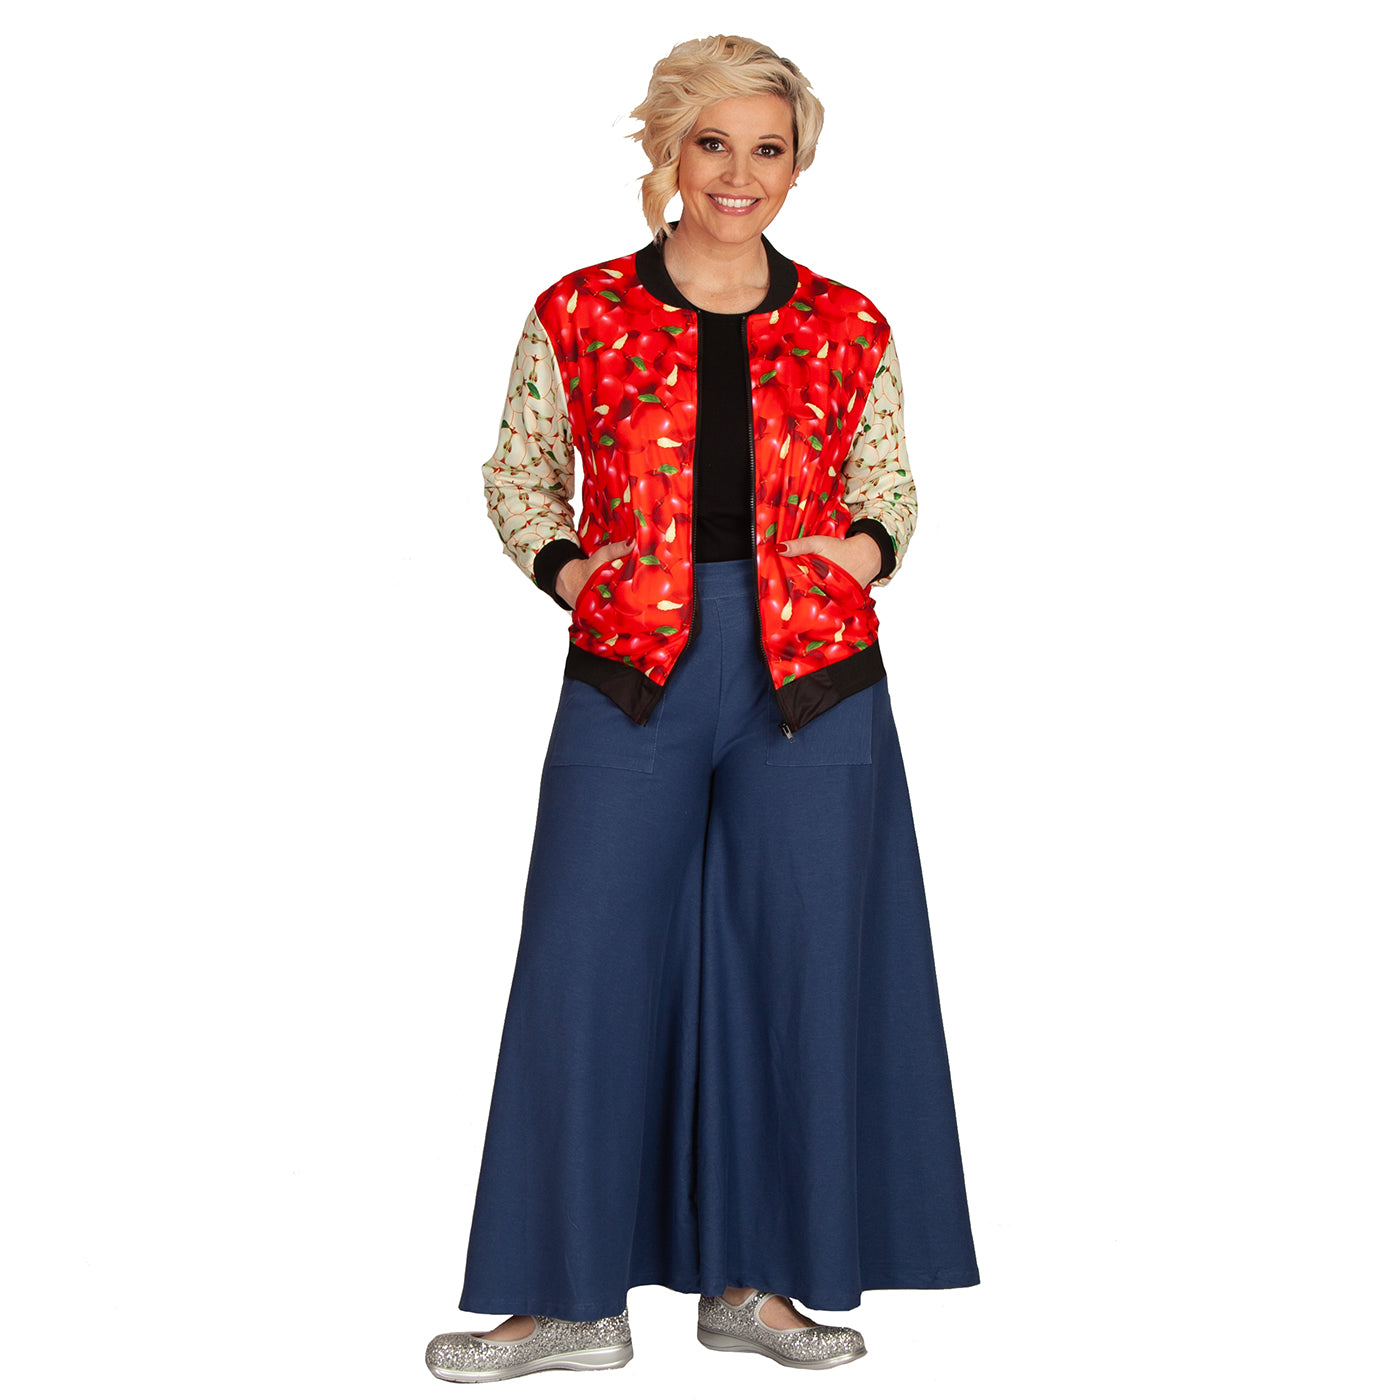 Orchard Bomber Jacket by RainbowsAndFairies.com (Red Apples - Apple Core - Snow White - Biker Jacket - Coat - Rock & Roll) - SKU: CL_BOMBJ_ORCHD_ORG - Pic 08